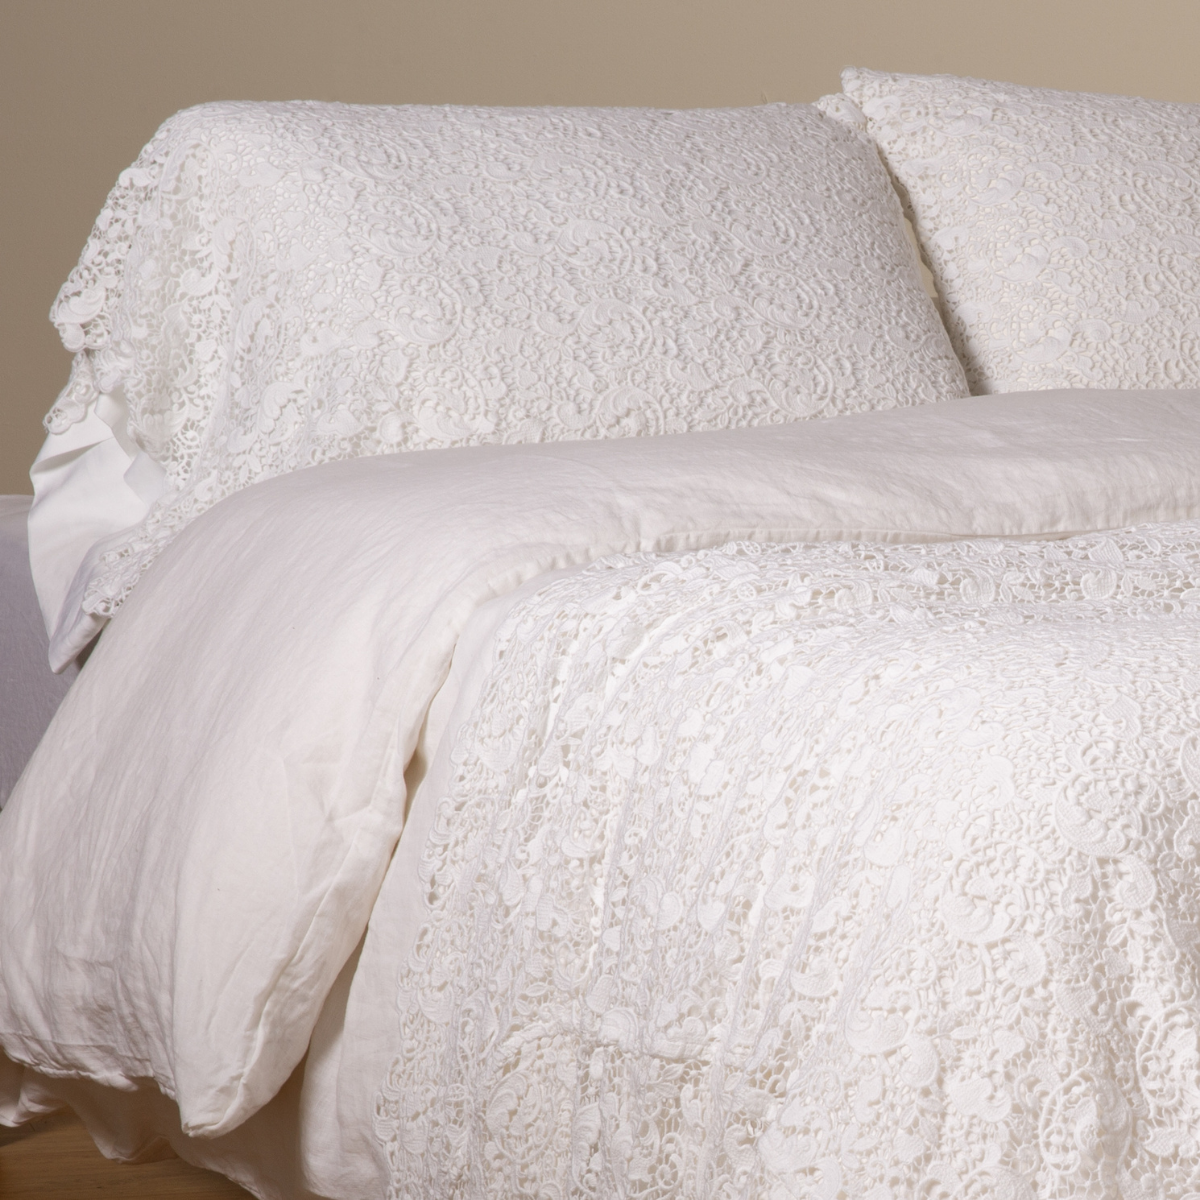 White: a pair of cotton lace pillowcase covers on winter white liners shown on a bed dressed in winter white linen with a matching cotton lace bed scarf. 